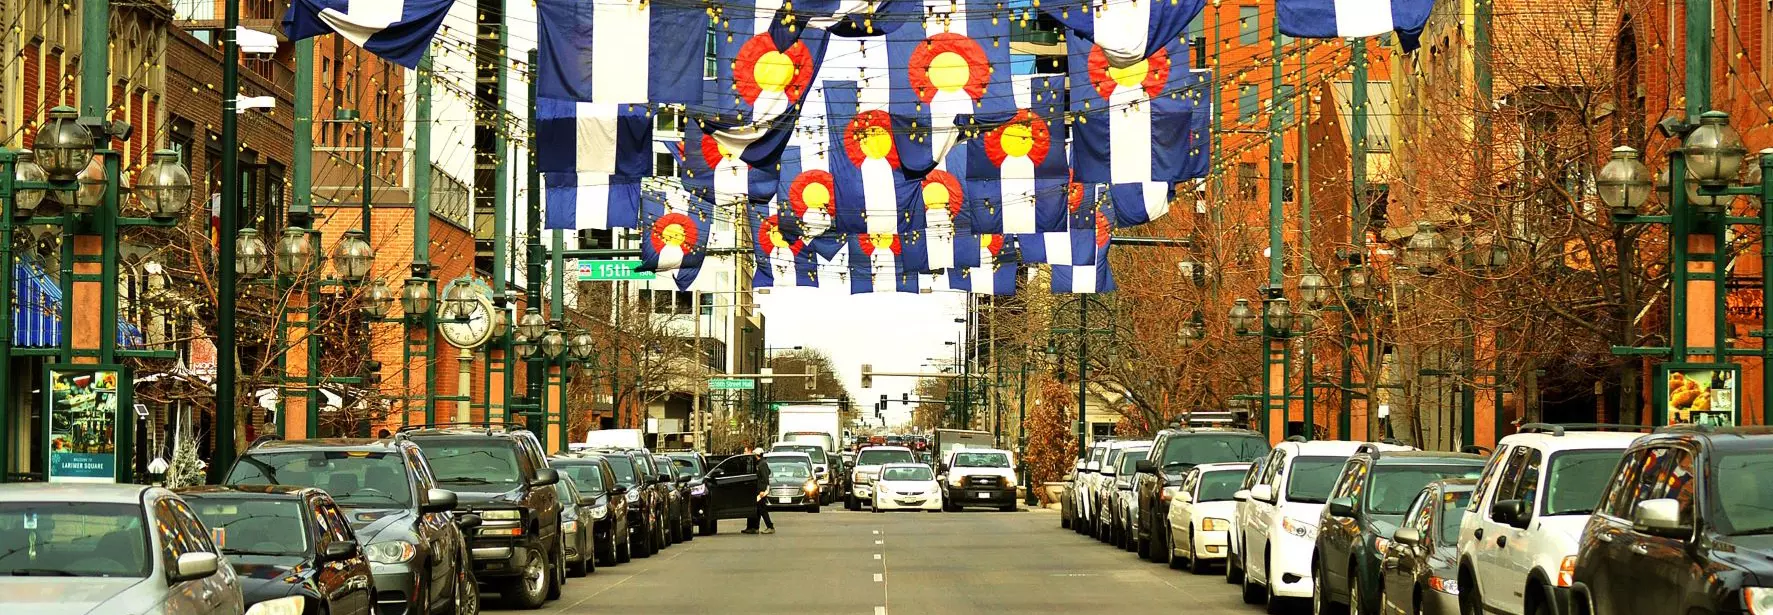 A photograph from the middle of the street facing cars that are stopped at a light in the distance. Cars are parked on both sides of the street, and many Colorado flags are hanging over the road from a rope between buildings on each side.